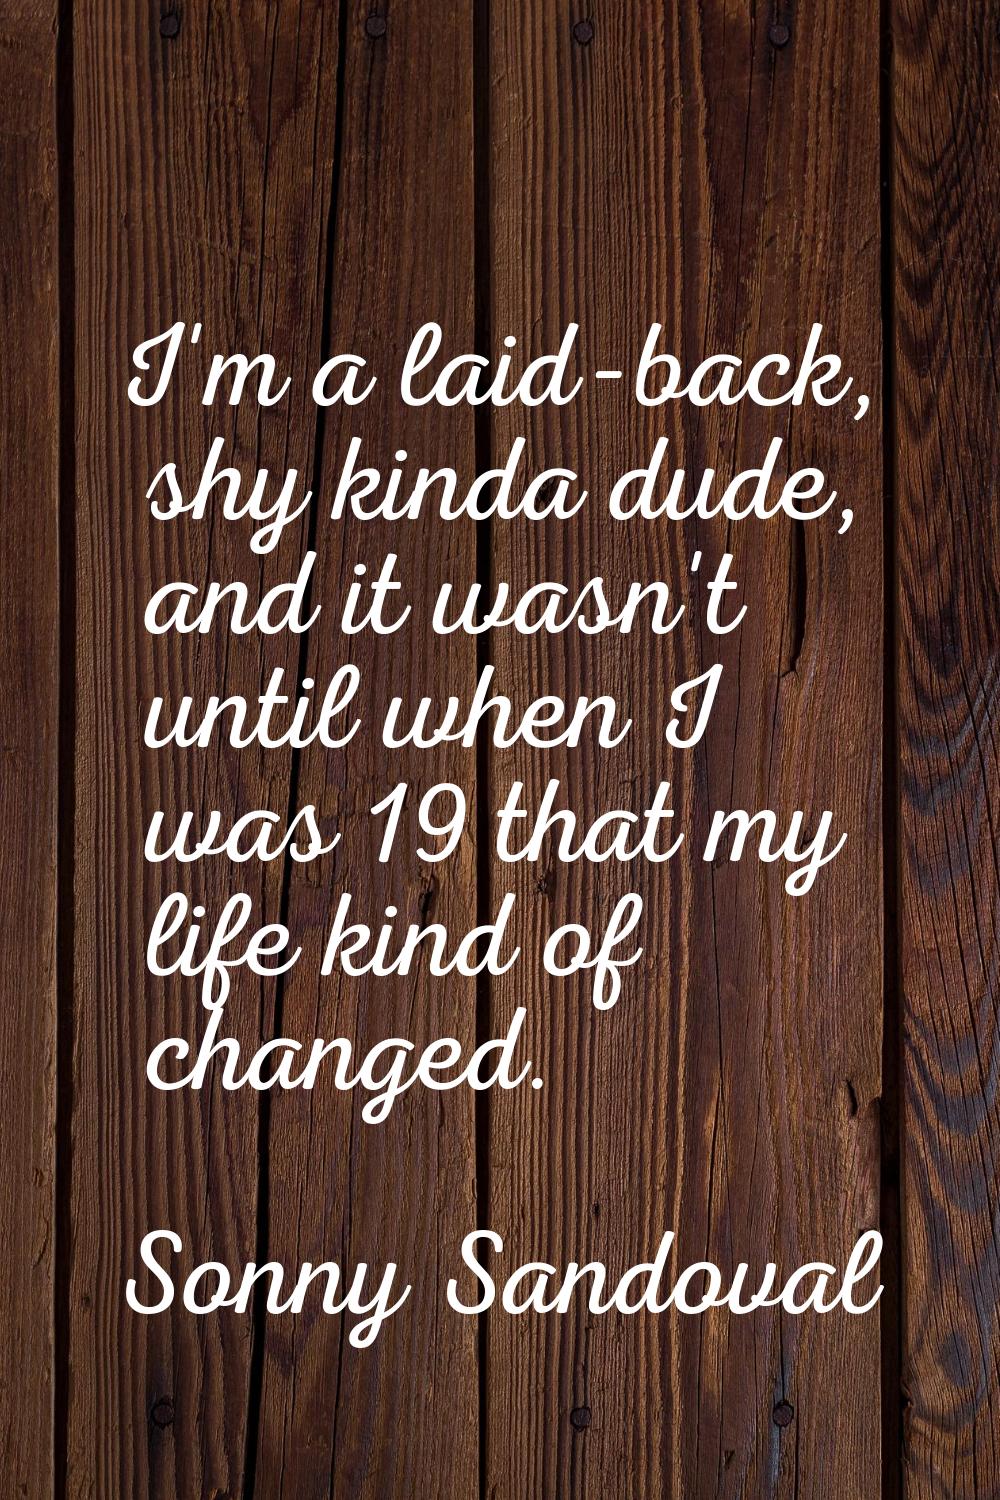 I'm a laid-back, shy kinda dude, and it wasn't until when I was 19 that my life kind of changed.